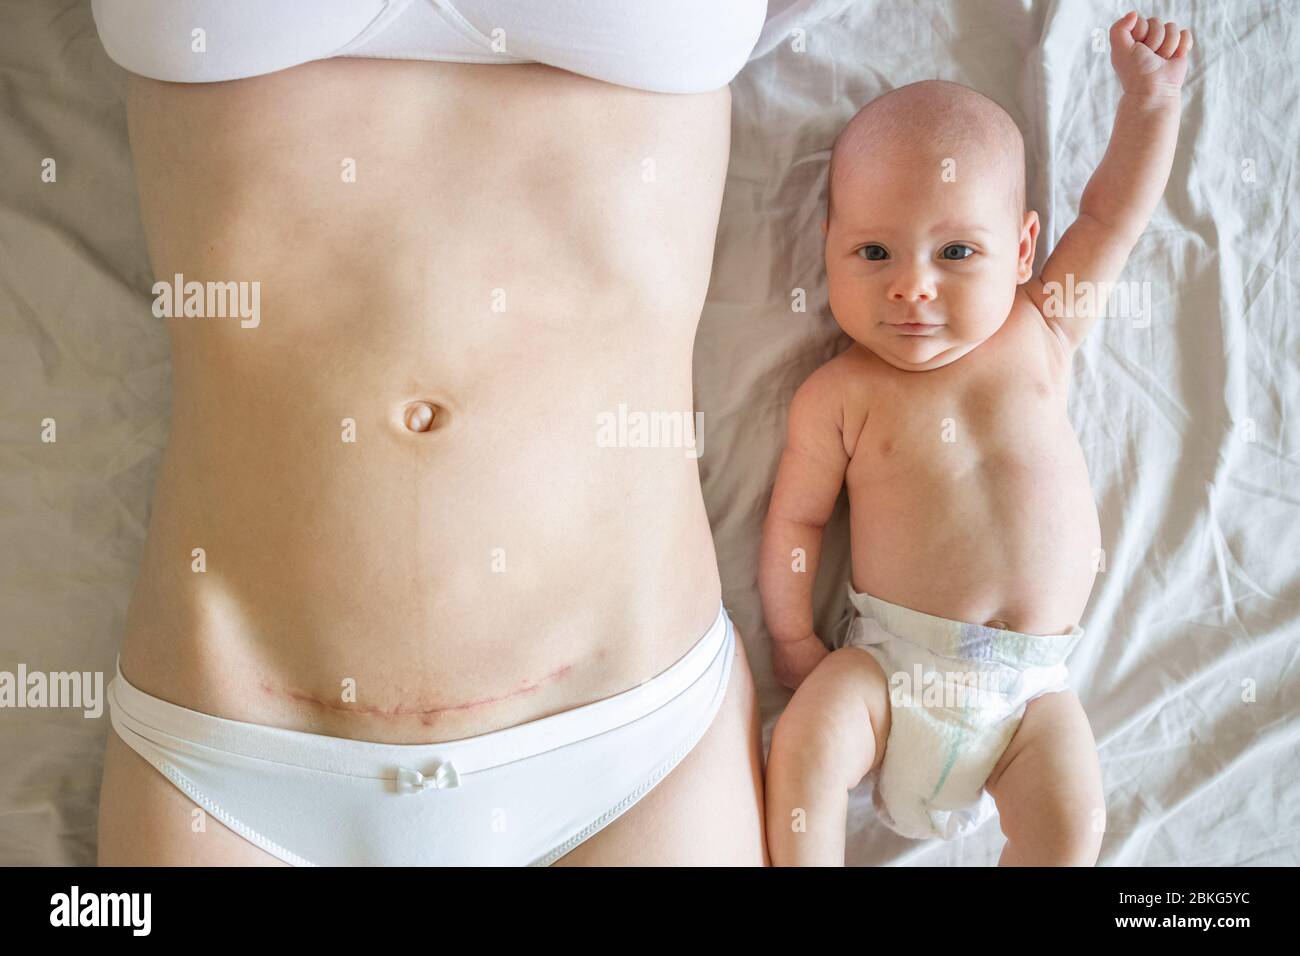 Closeup of woman belly with a scar from a cesarean section and her baby near Stock Photo